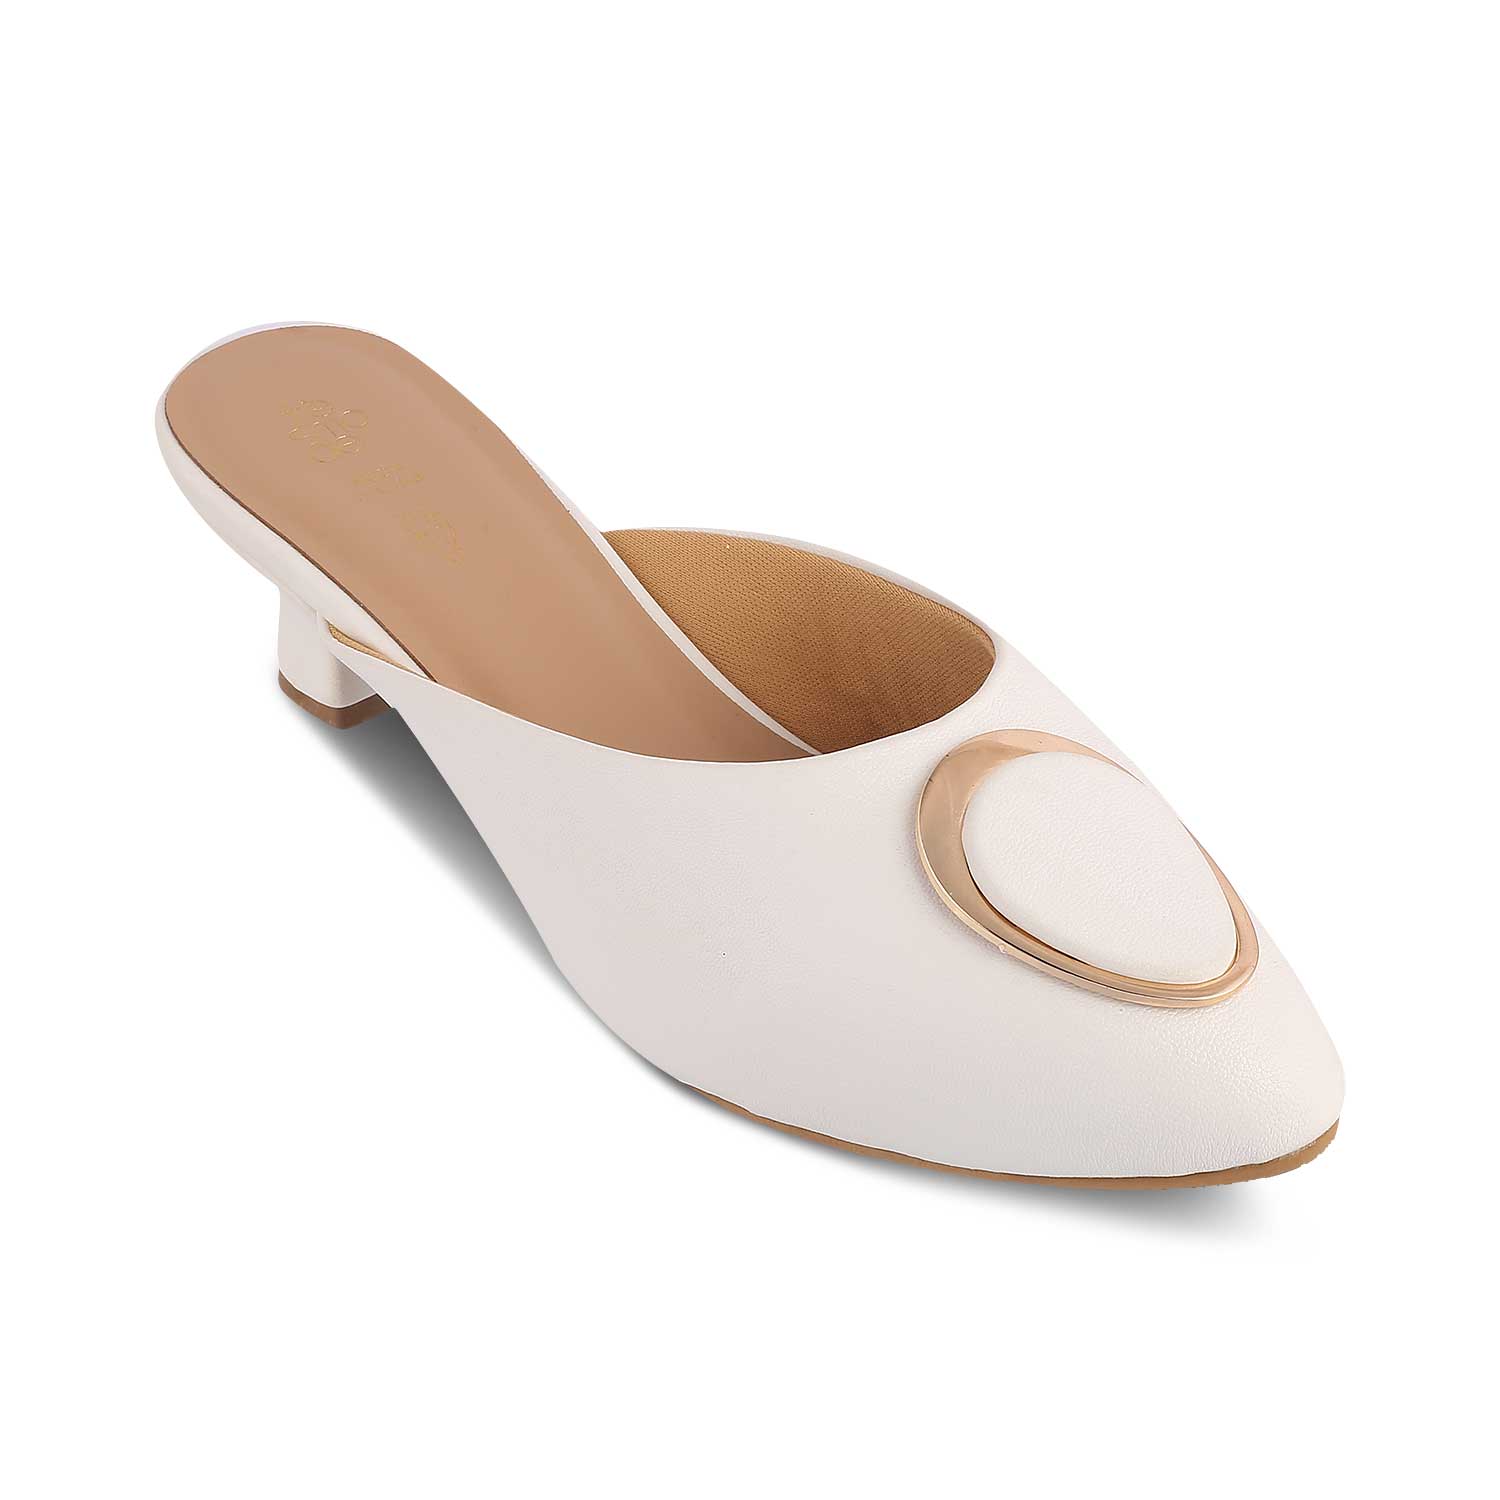 The Jelew White Women's Dress Mule Sandals Tresmode